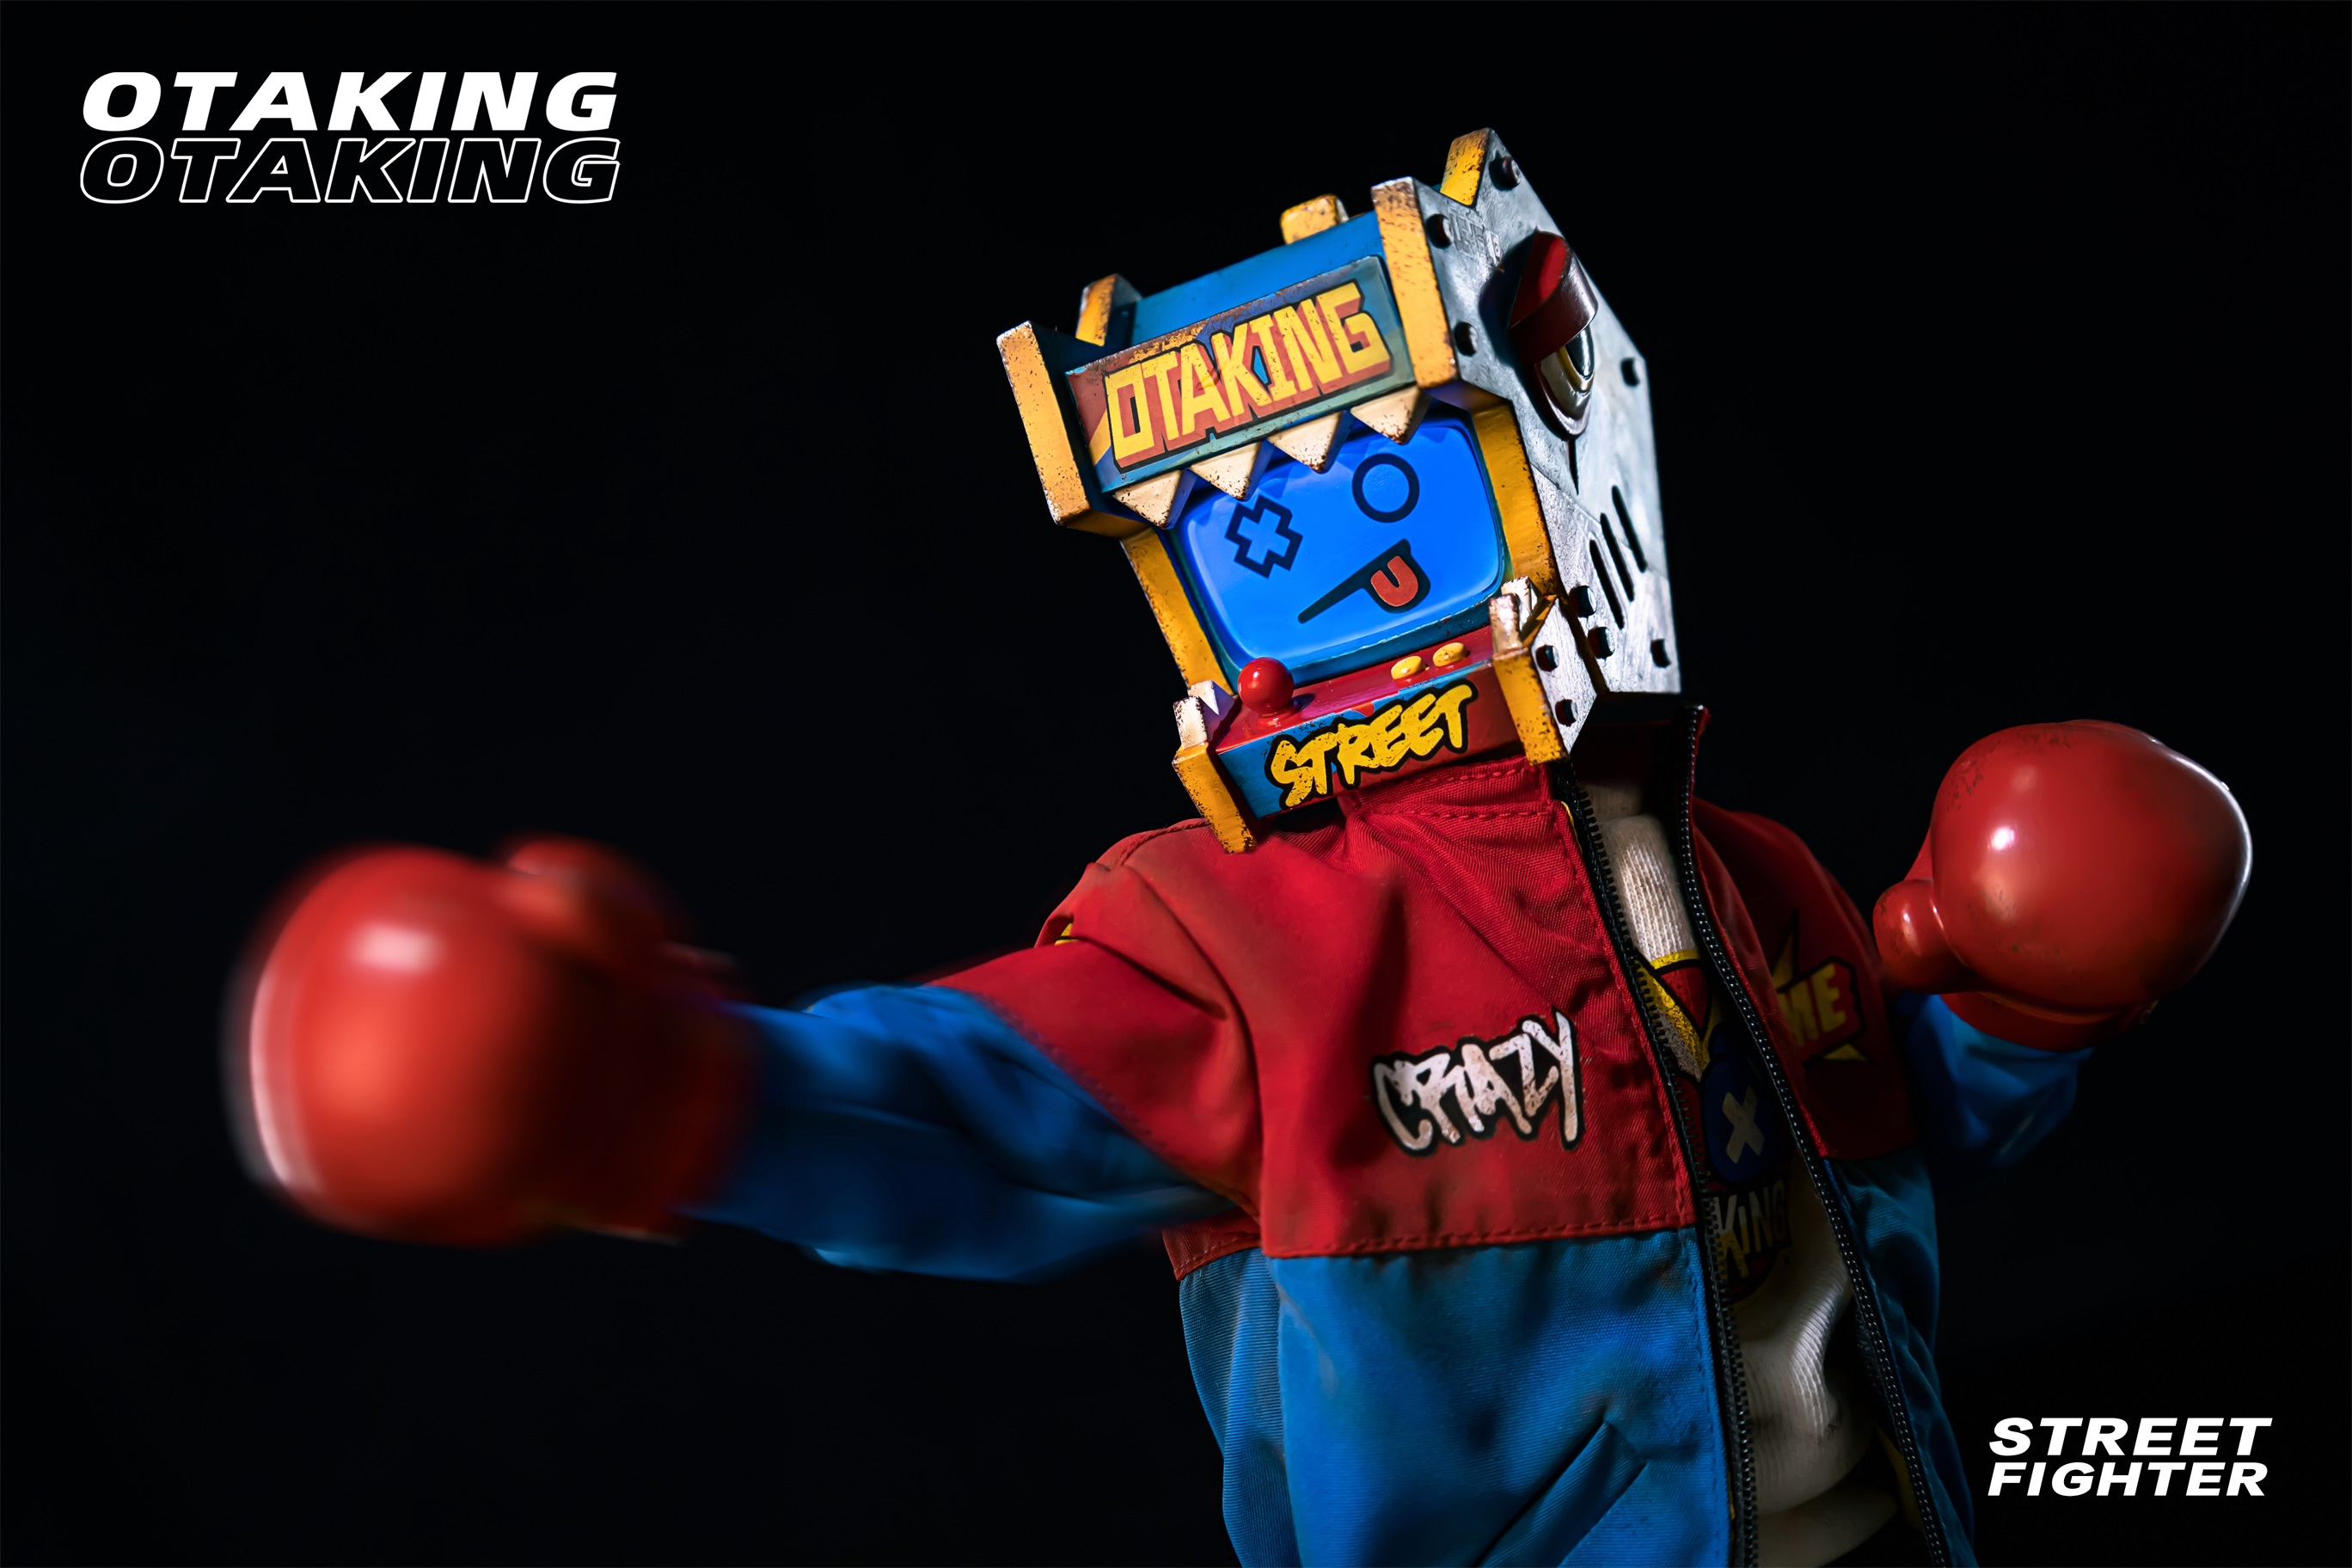 Person wearing OTAKING - Street fighter robot garment holding toy and graffiti on box.